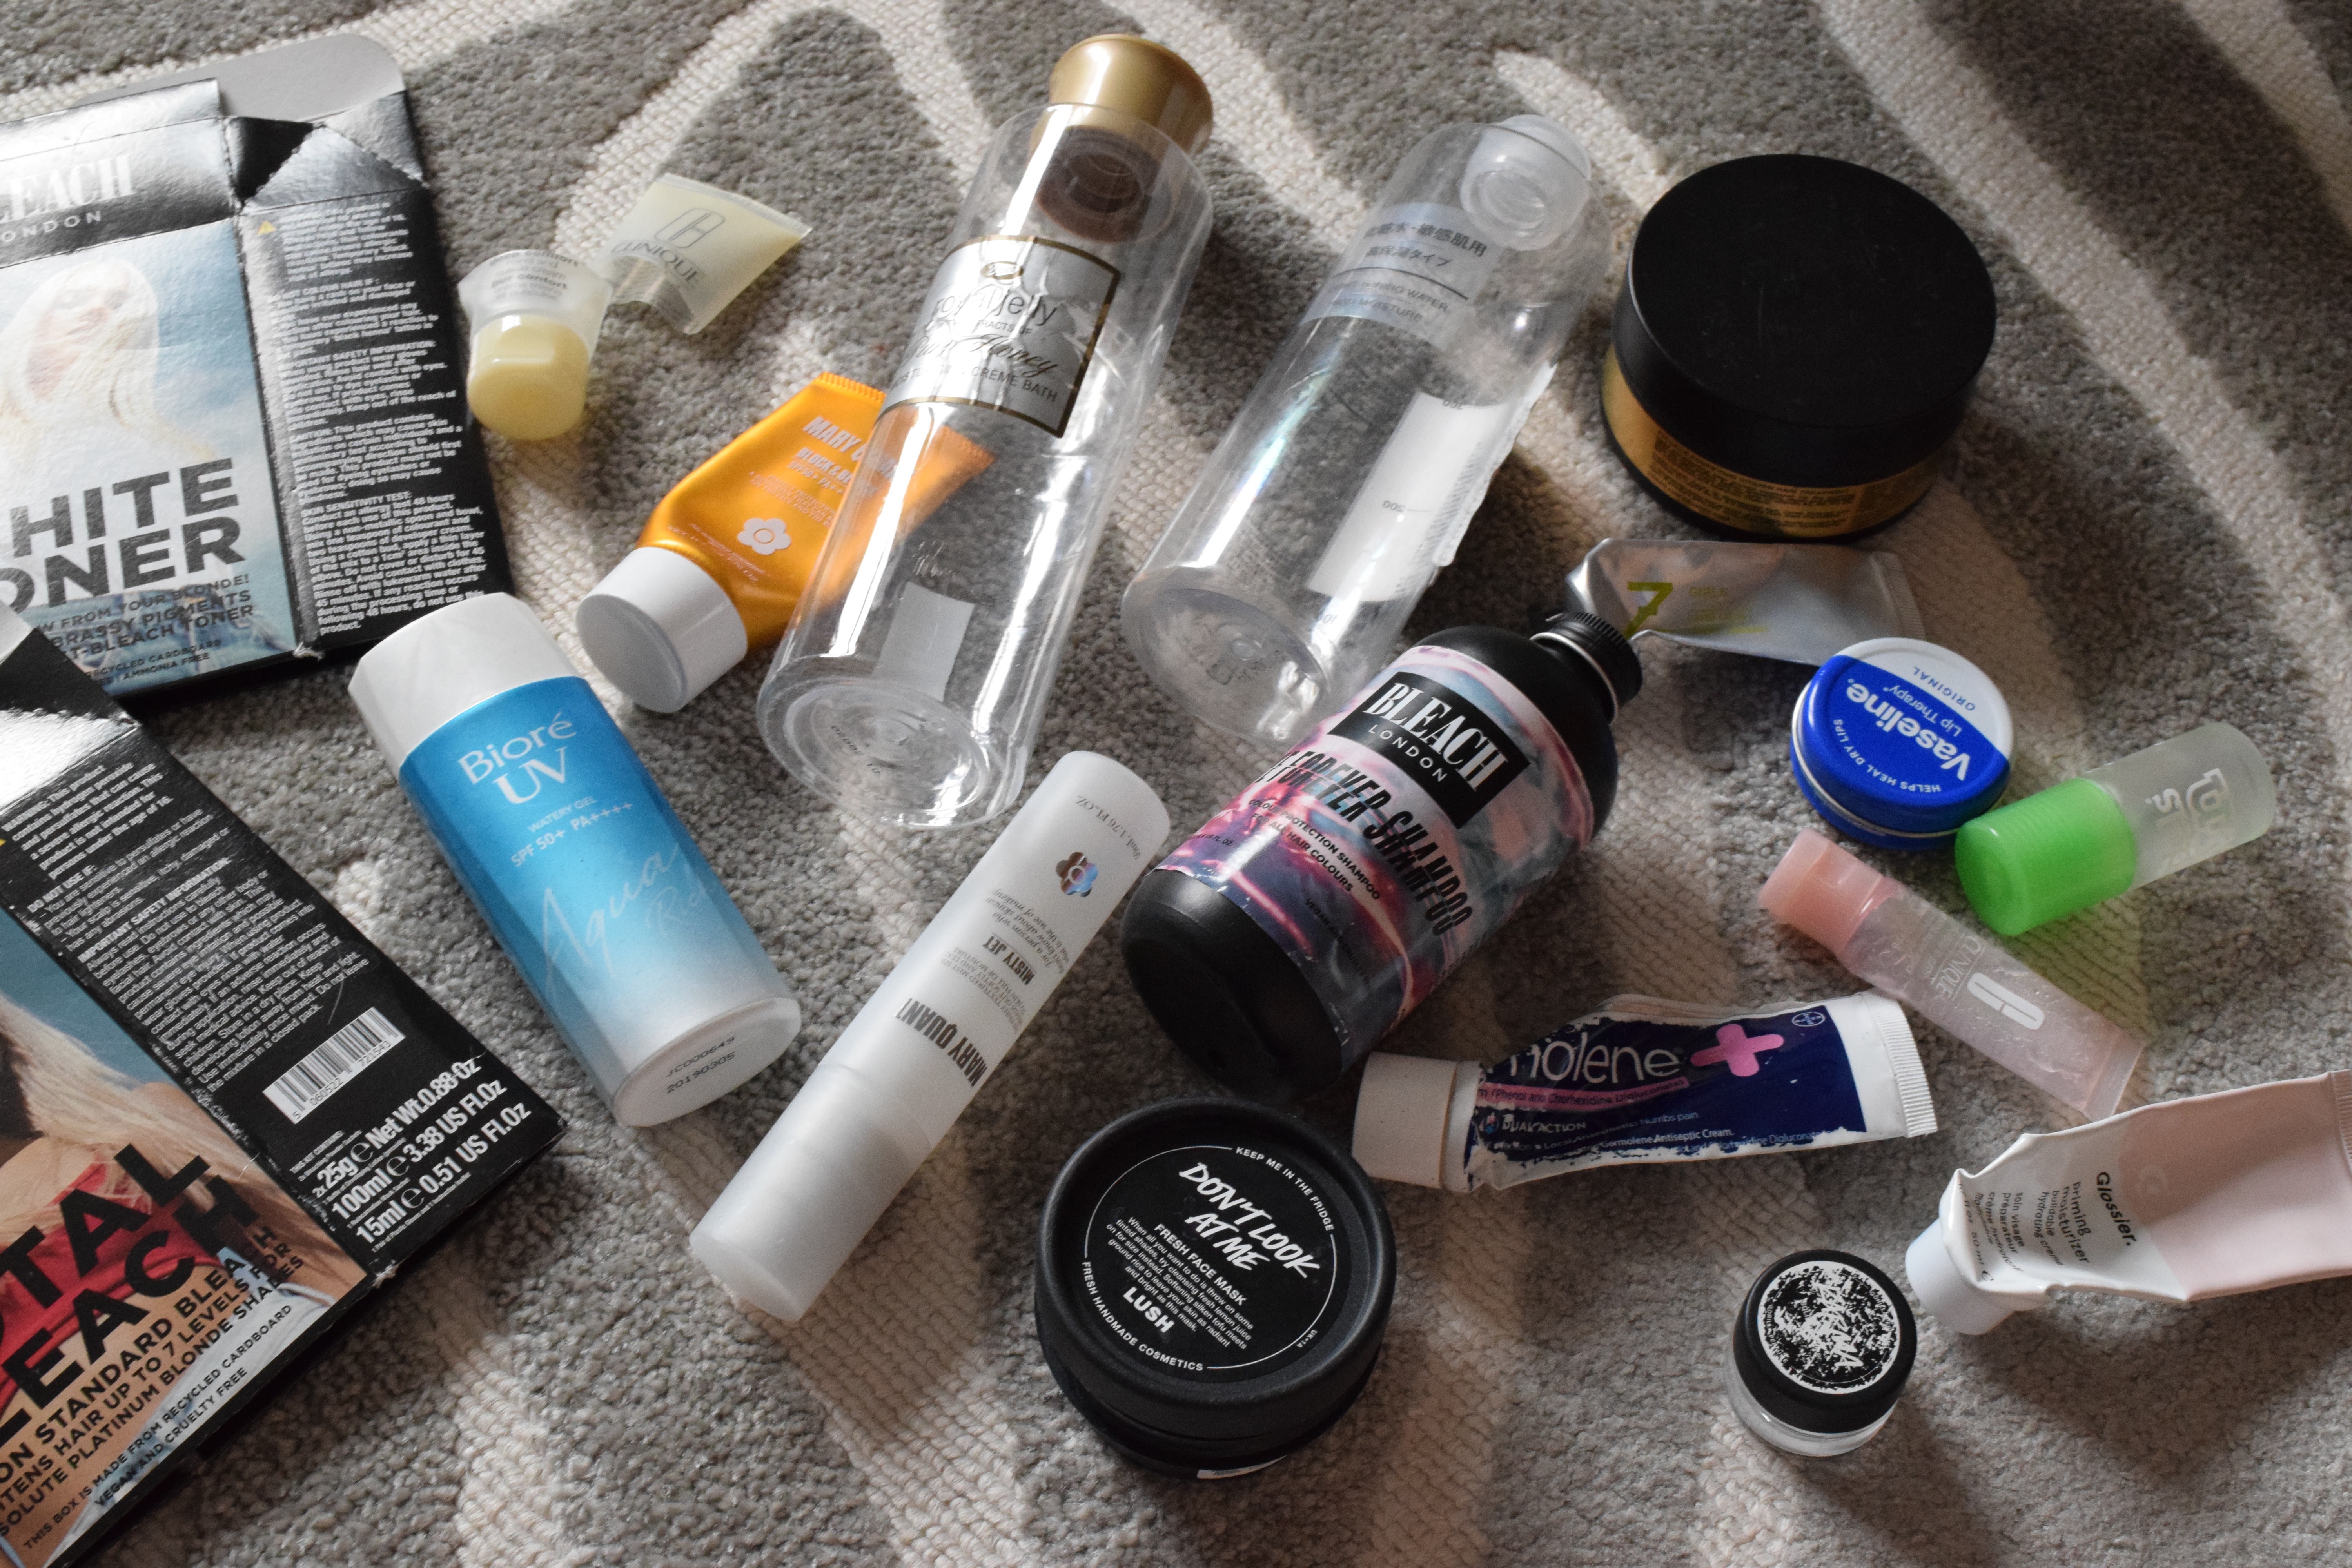 Empty products from brands including Clinique, Mary Quant, Bleach London and Lush